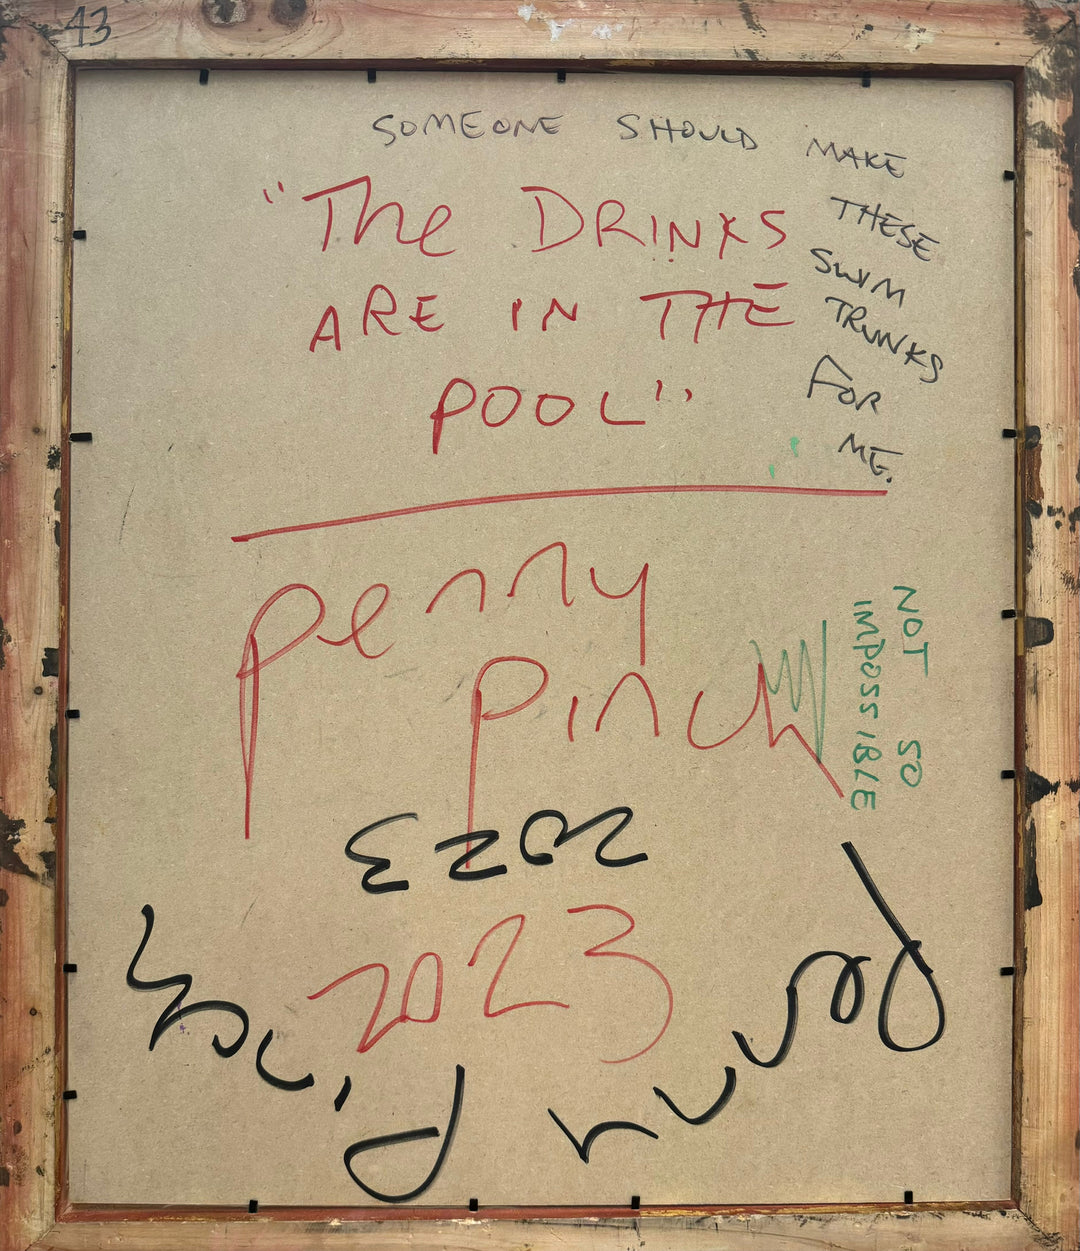 Painting 43: "The Drinks Are In the Pool"